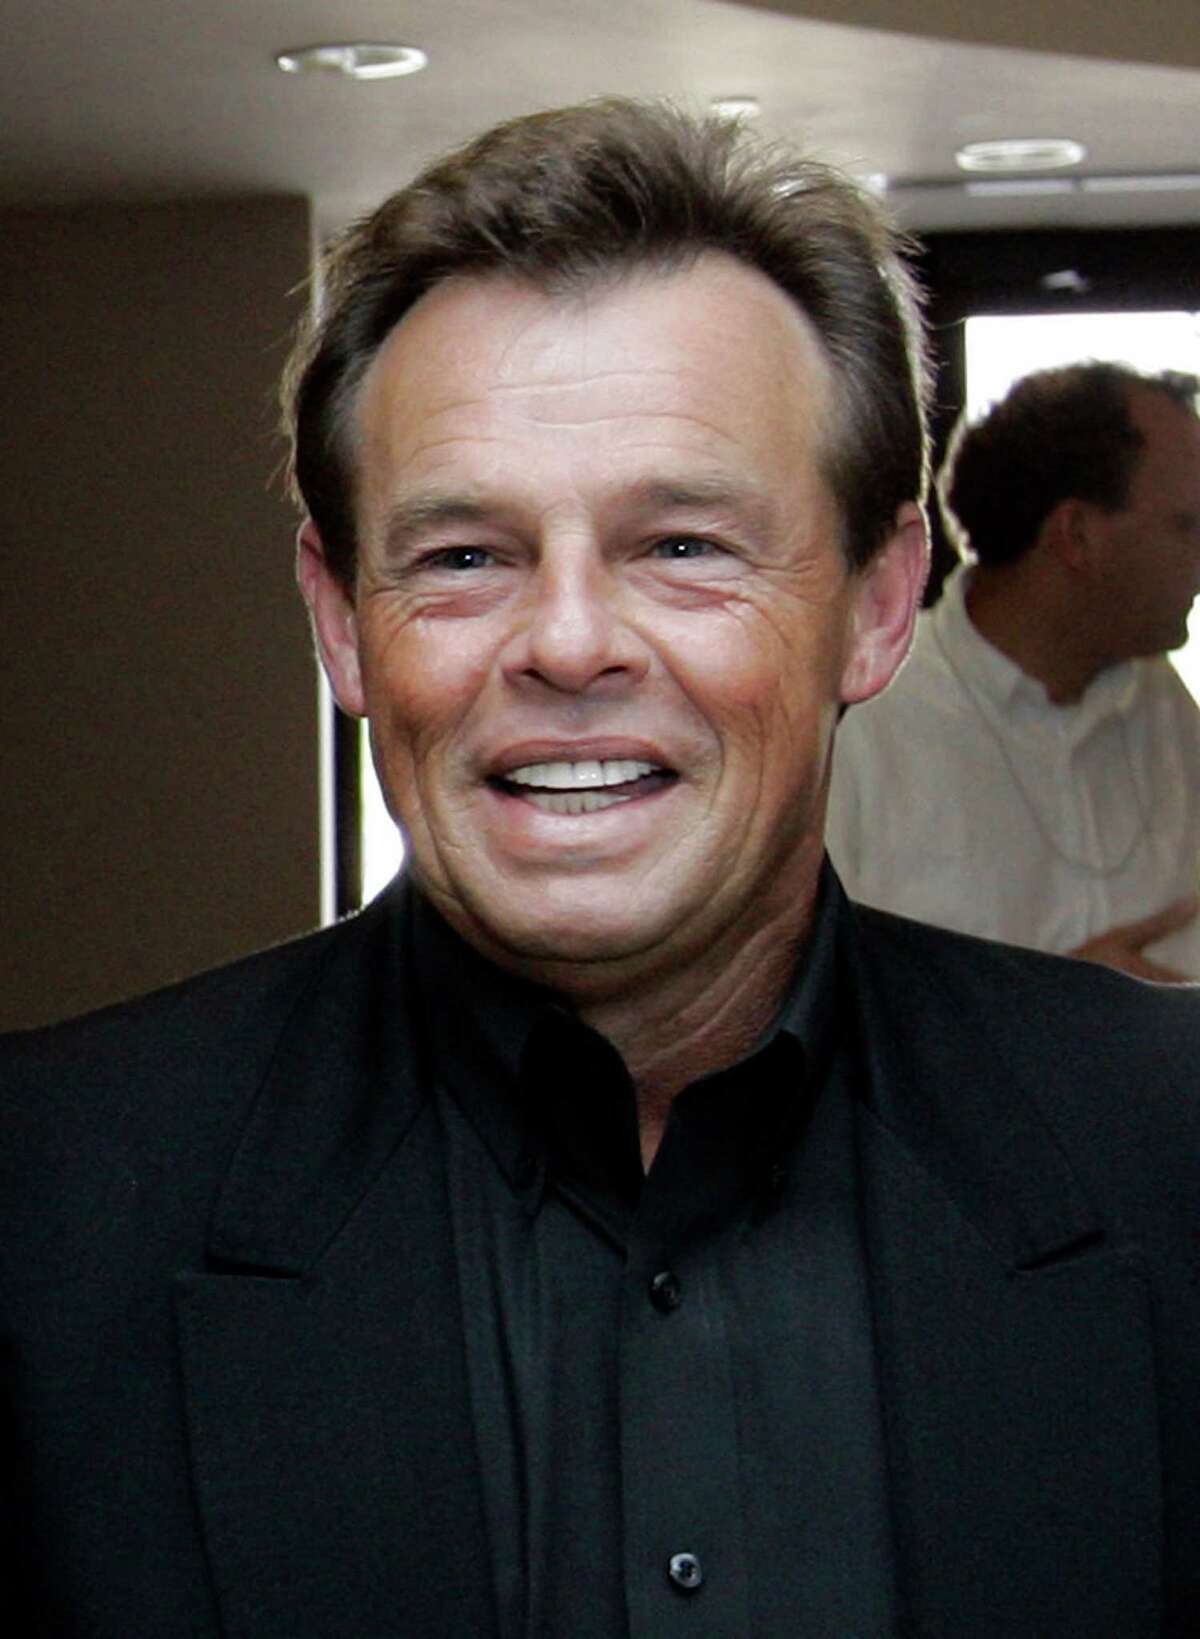 5, 2007 file photo shows country singer Sammy Kershaw at the Secretary of S...